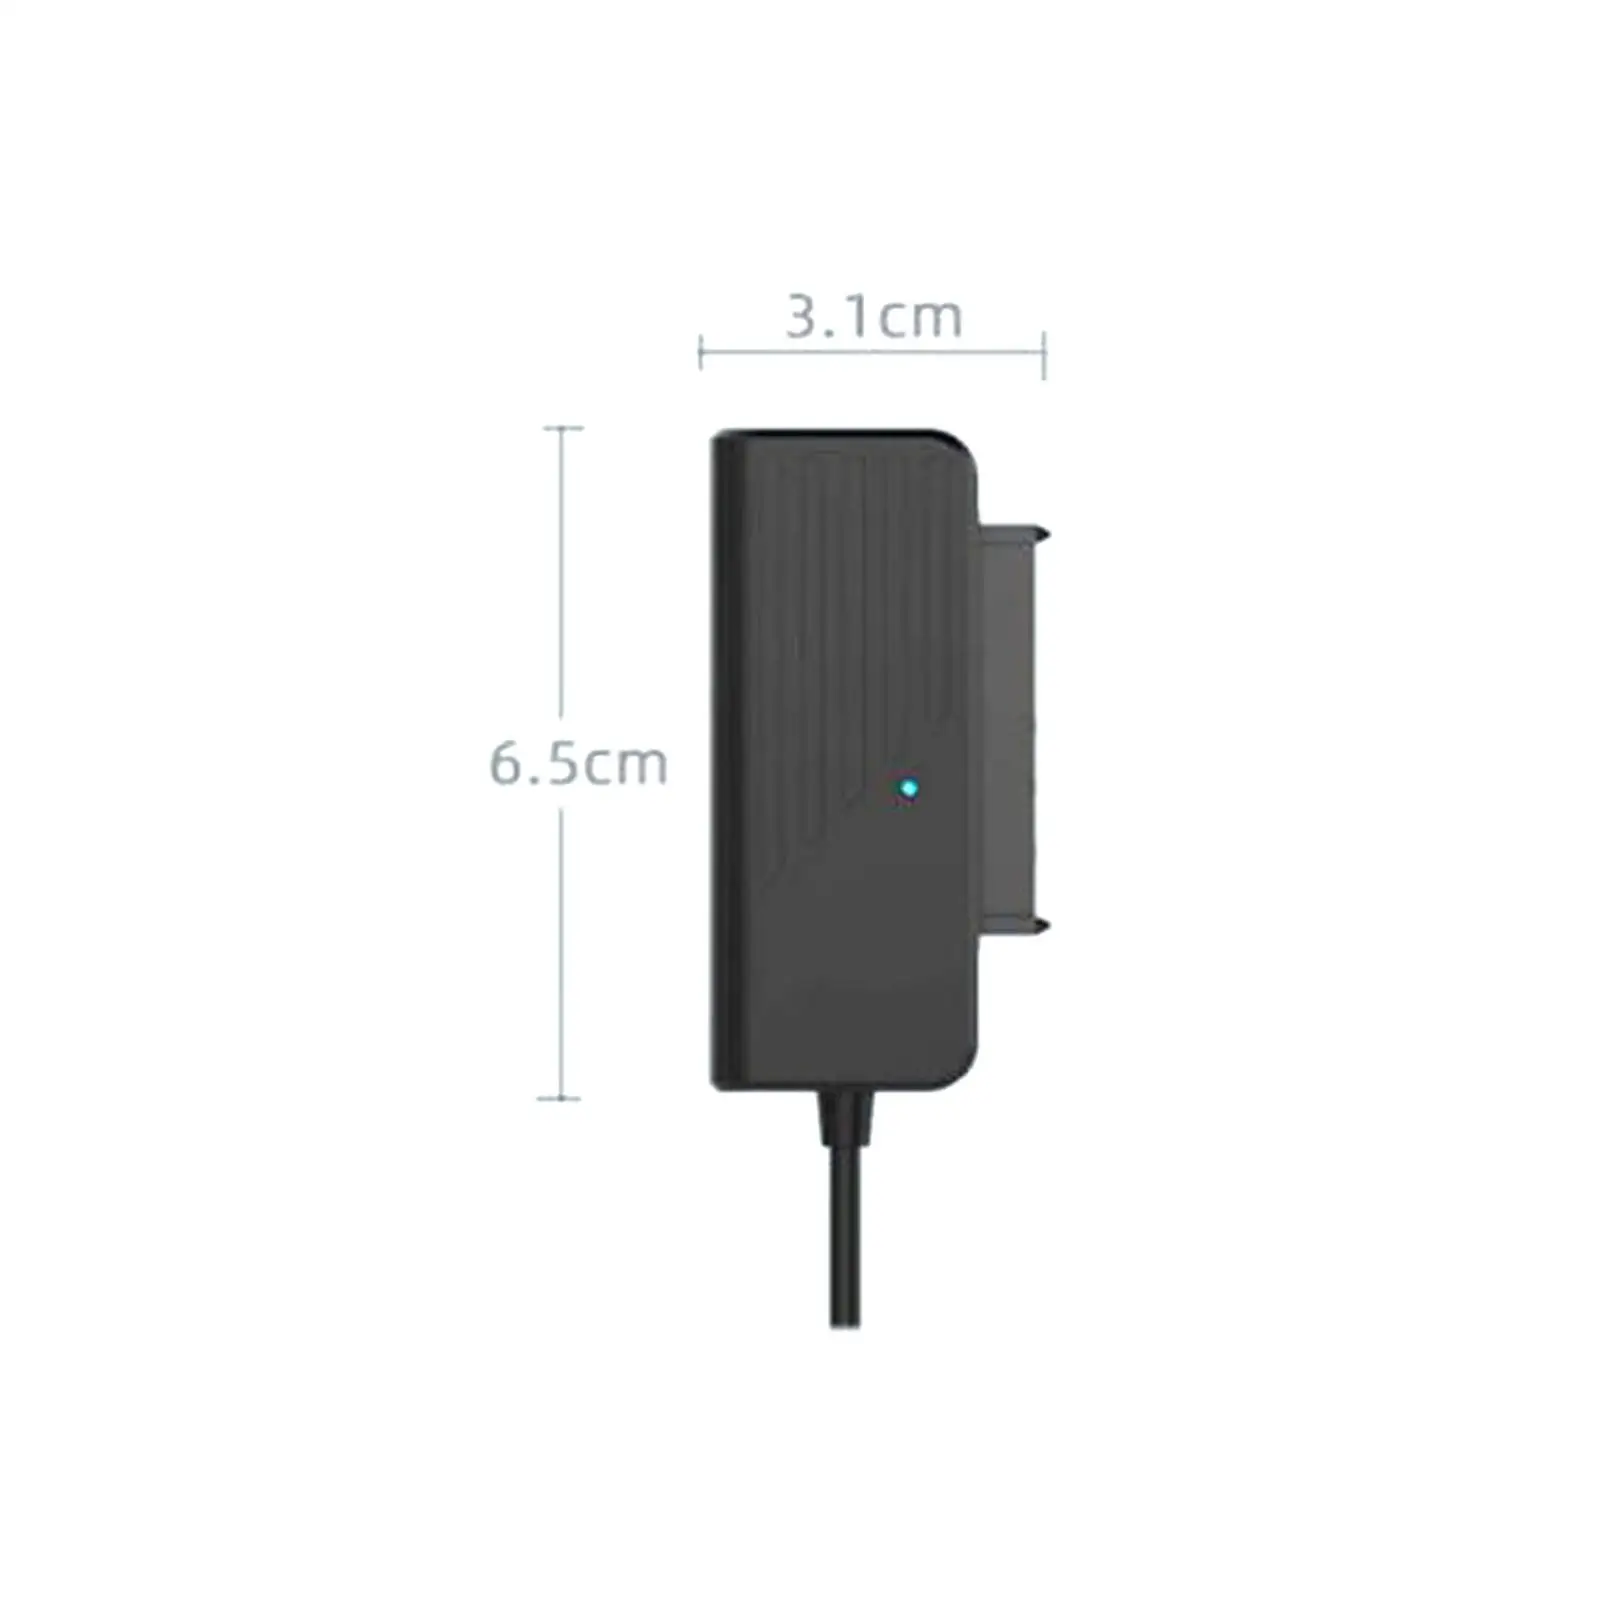 Converter Connector Optical Drive Plug and Play Slim HDD  to USB  to USB 3.0 Adapter  to USB Adapter for Accessories